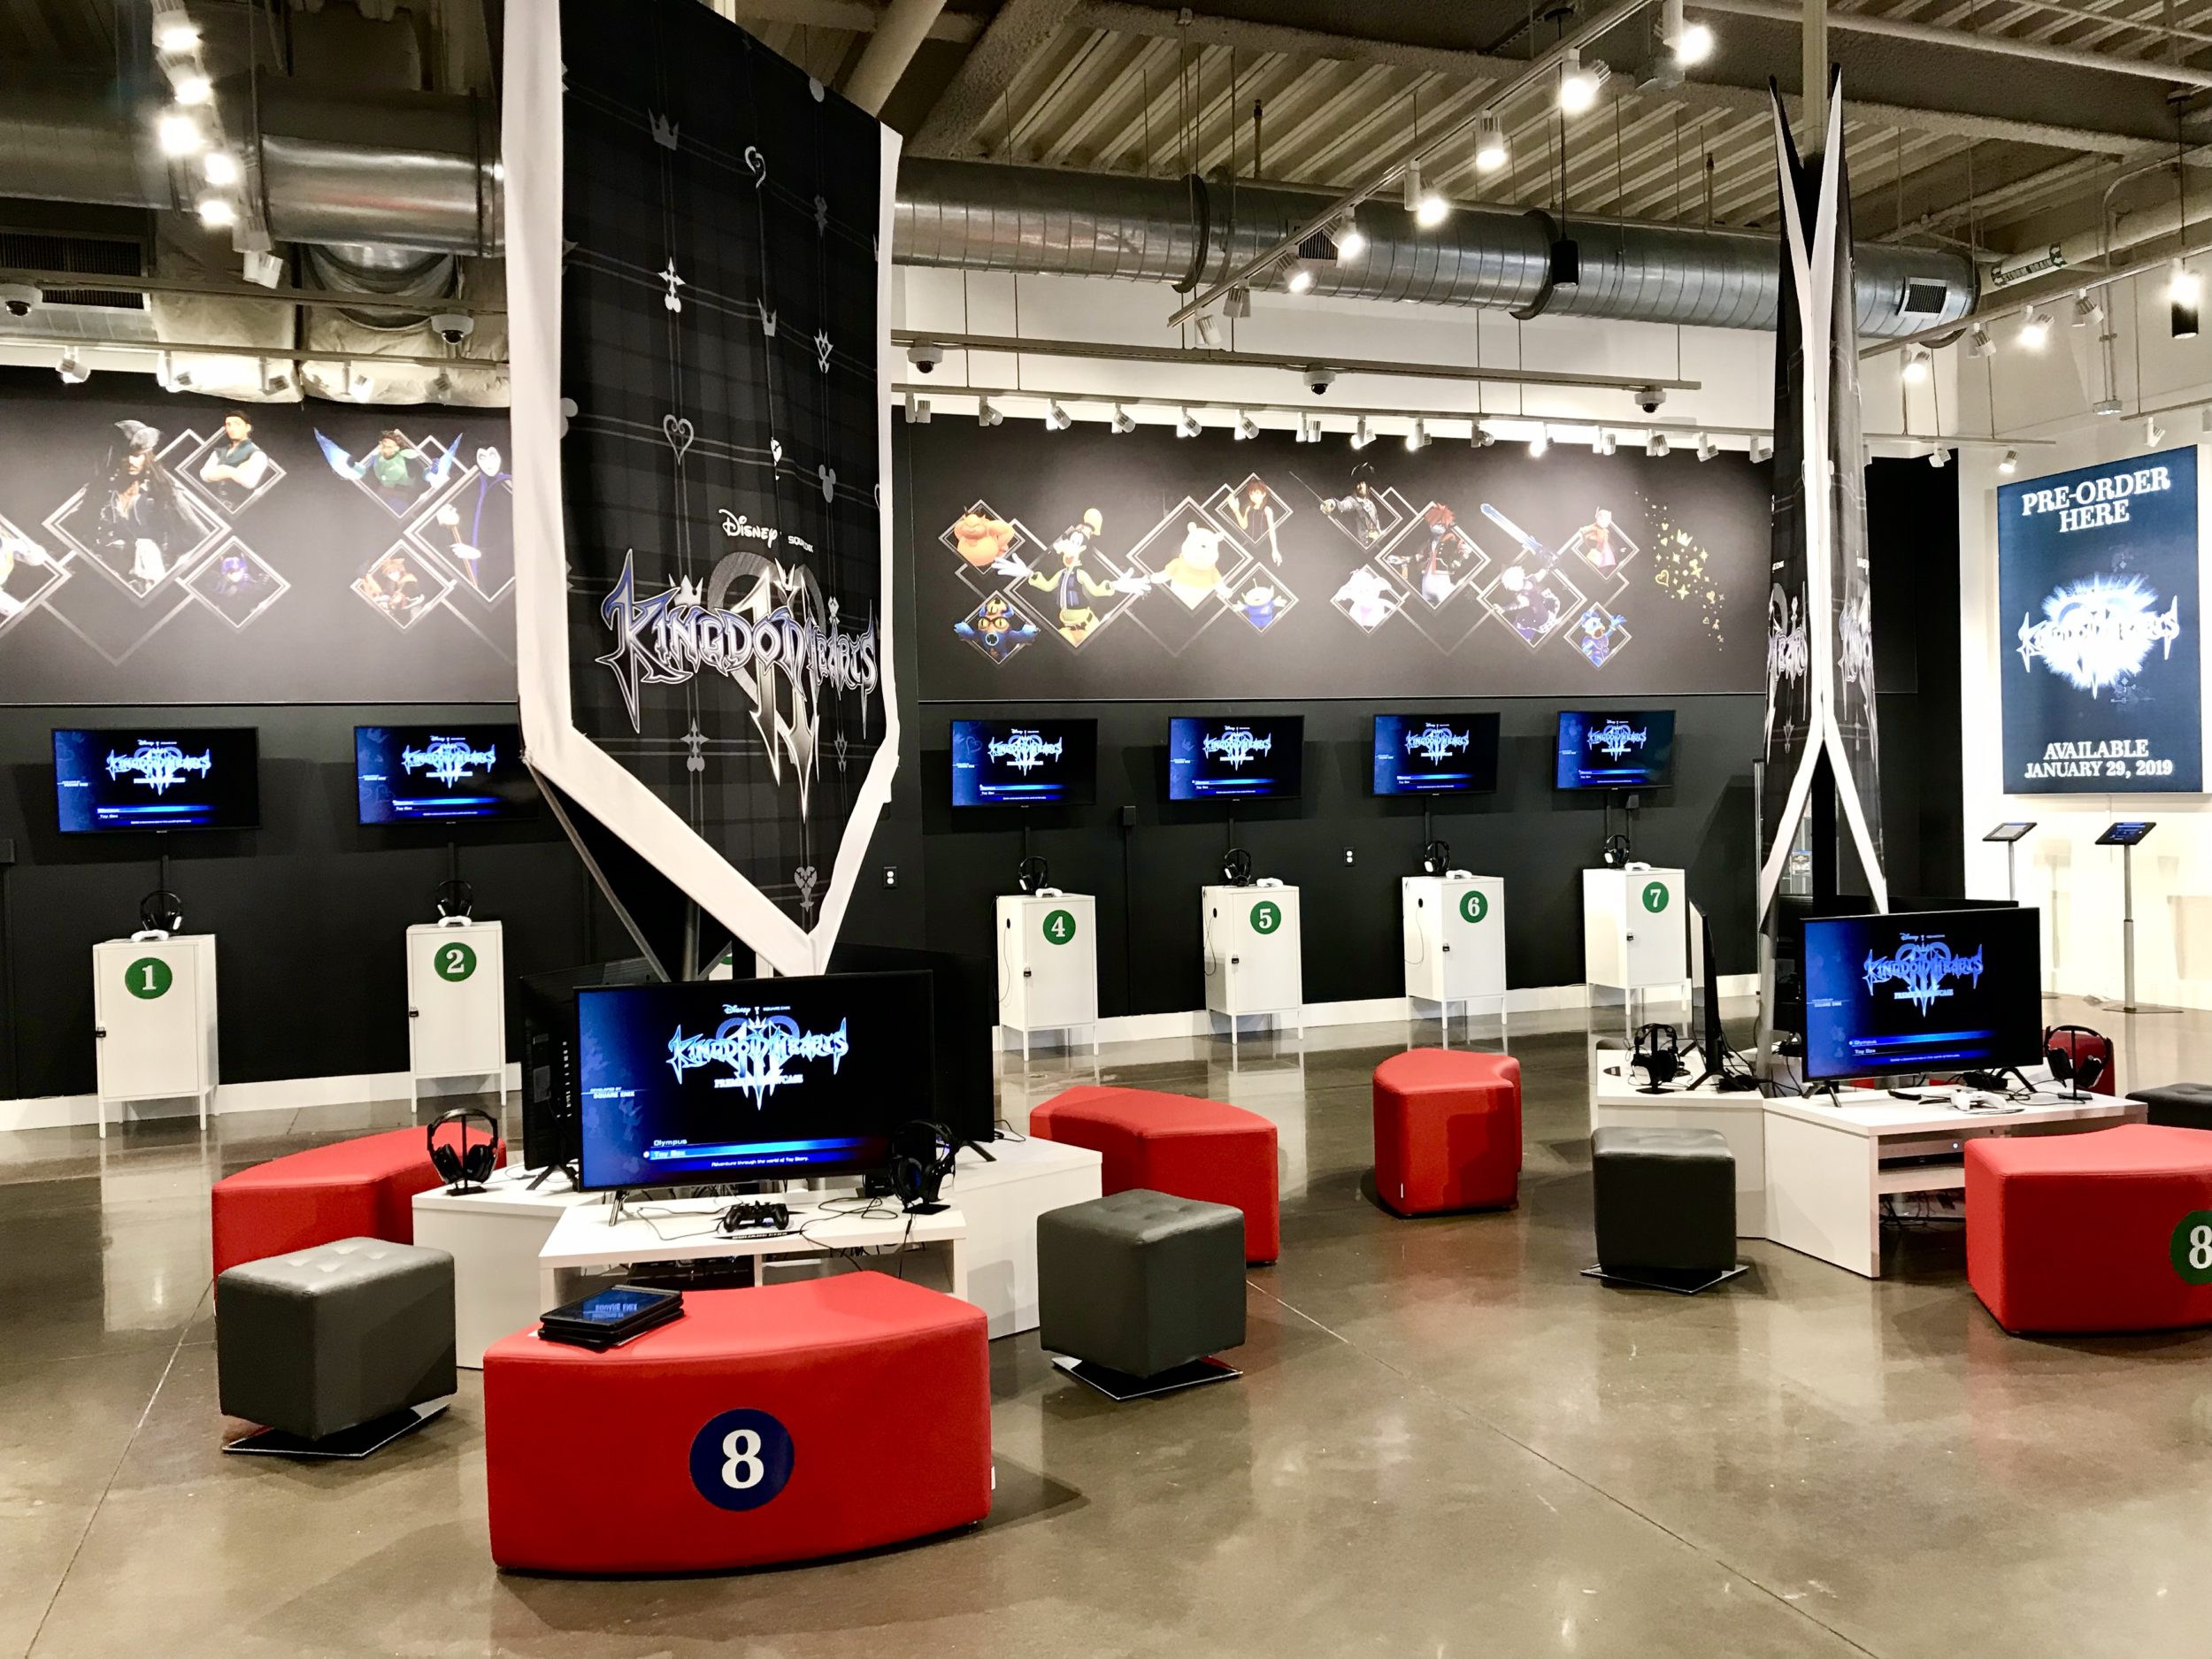 Review: Kingdom Hearts III Experience Now Open at Disney Springs